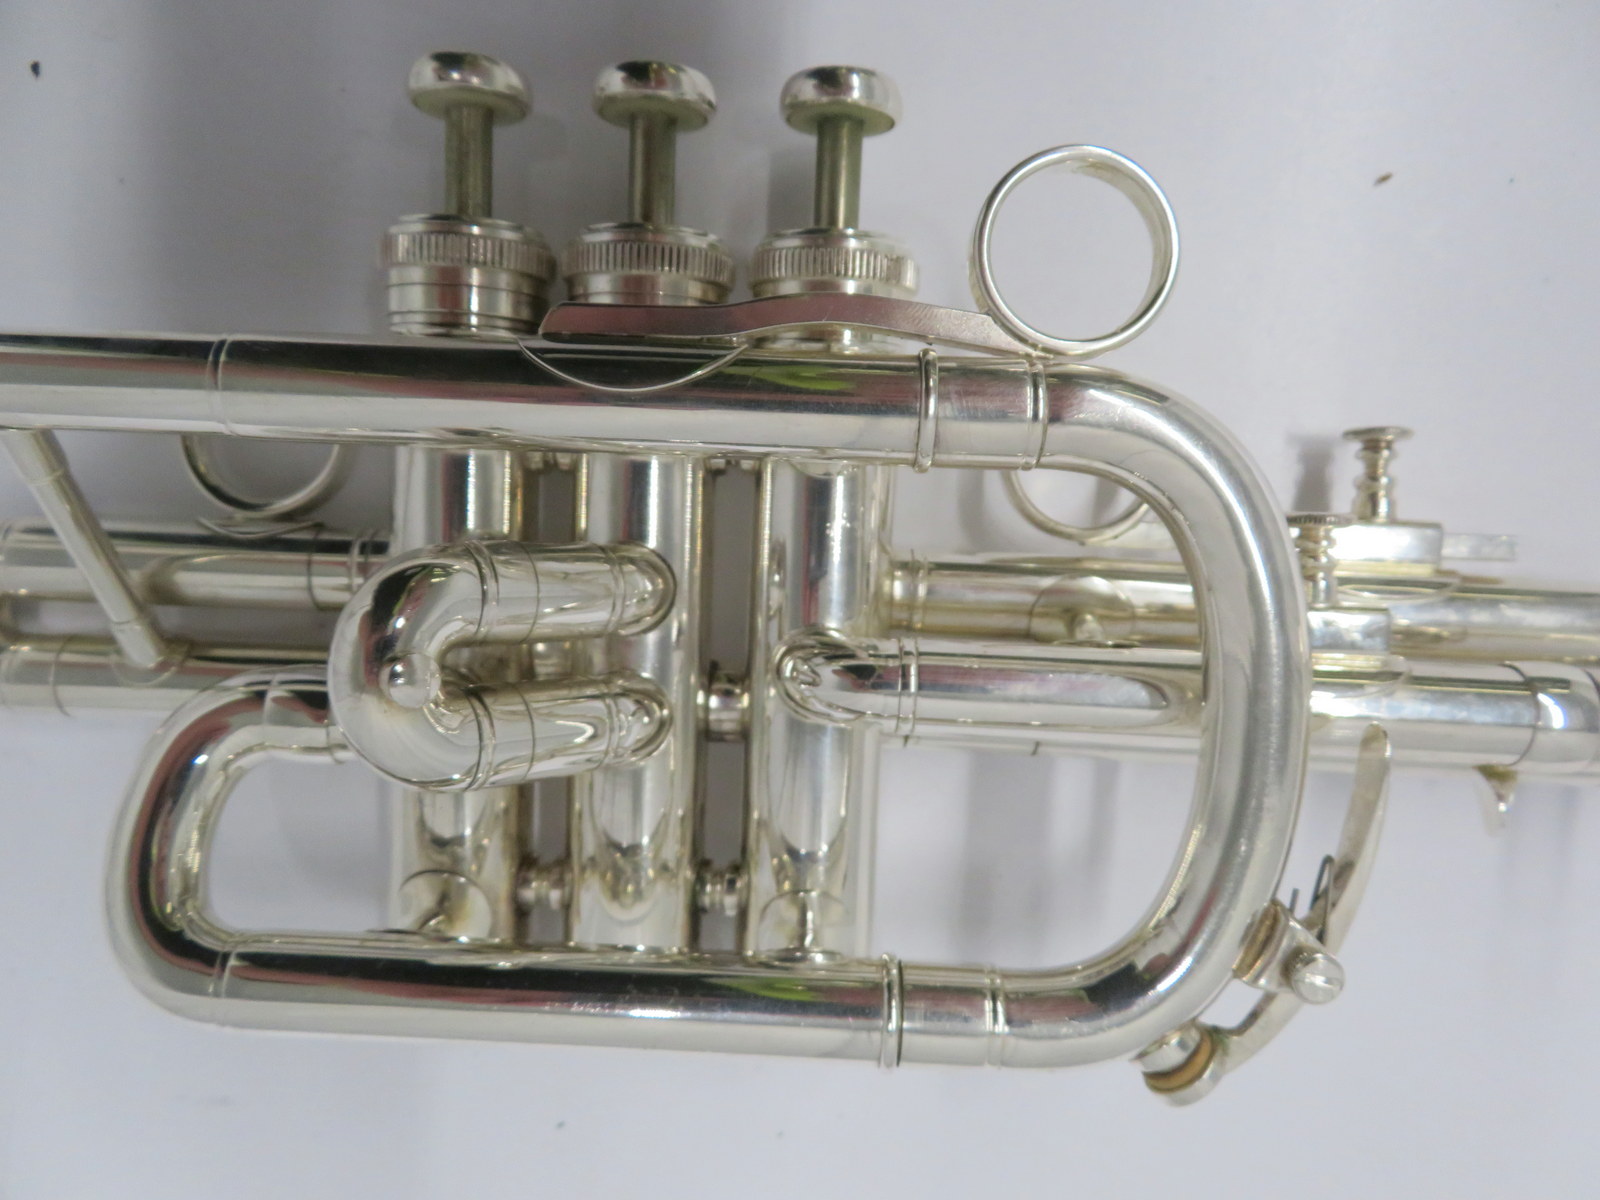 Besson BE706 International fanfare trumpet with case. Serial number: 885983. - Image 11 of 13